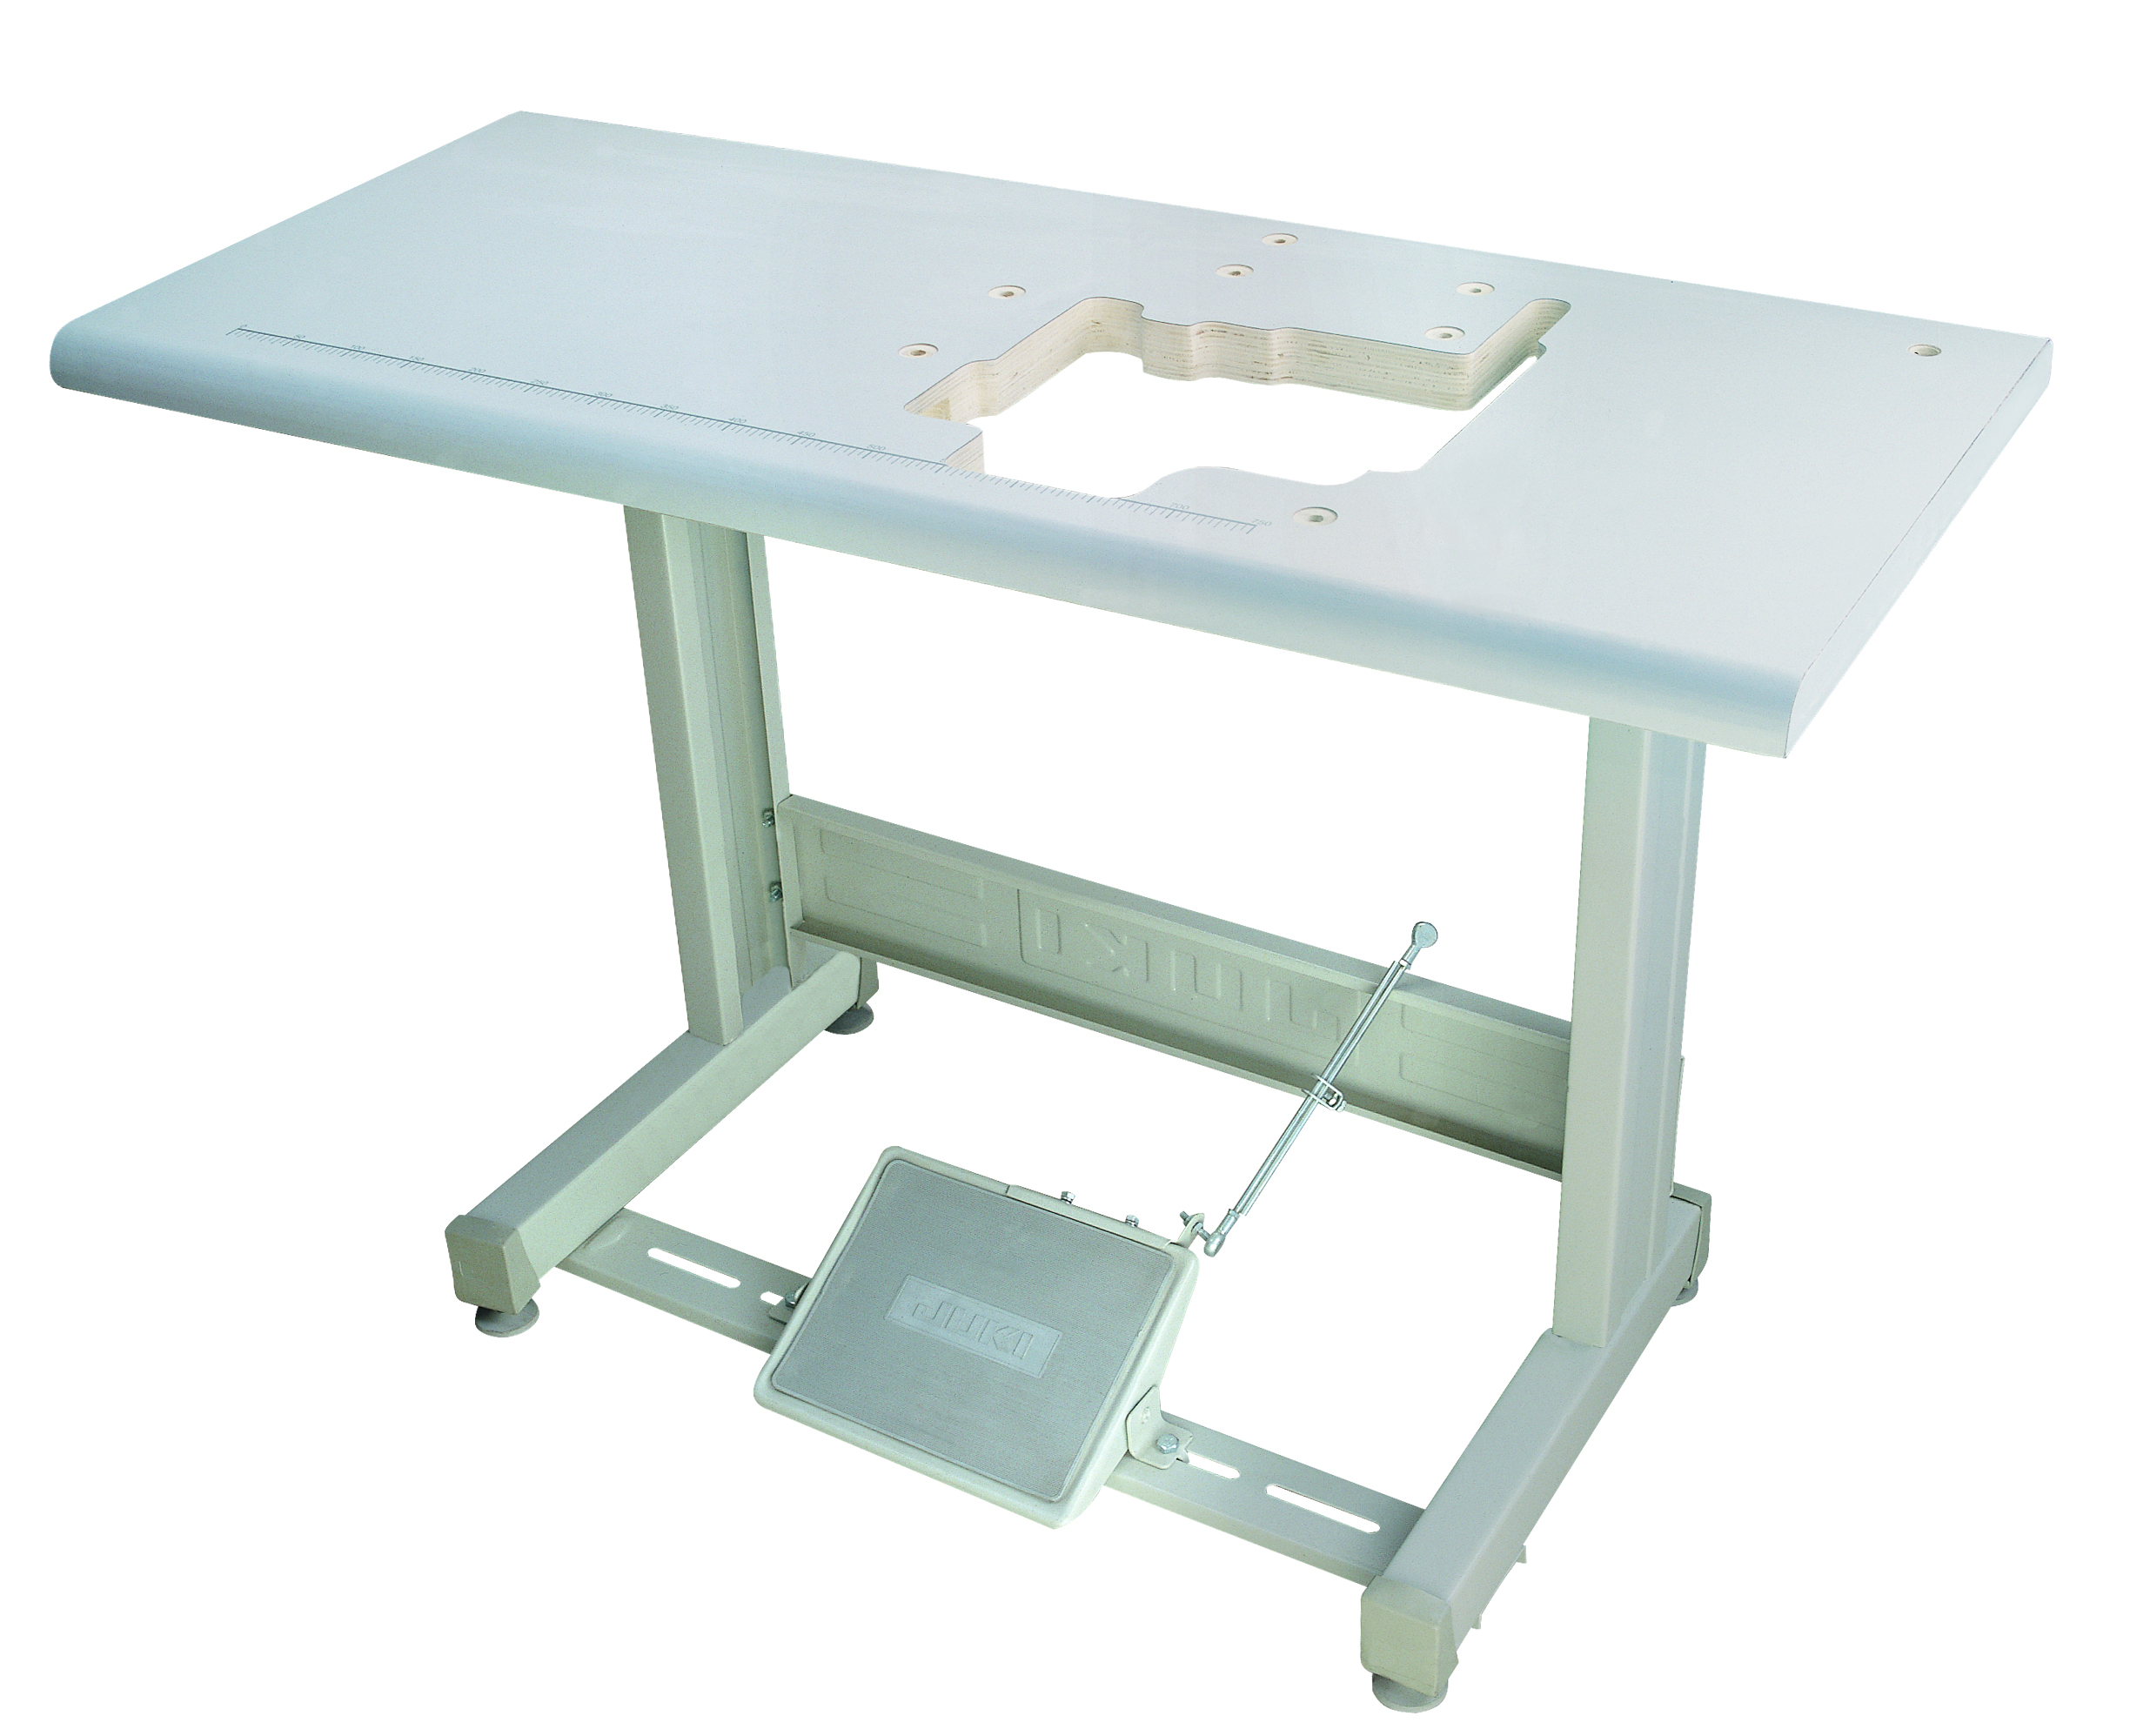 high quality industrial sewing machine tables and adjustable sewing stand with casters